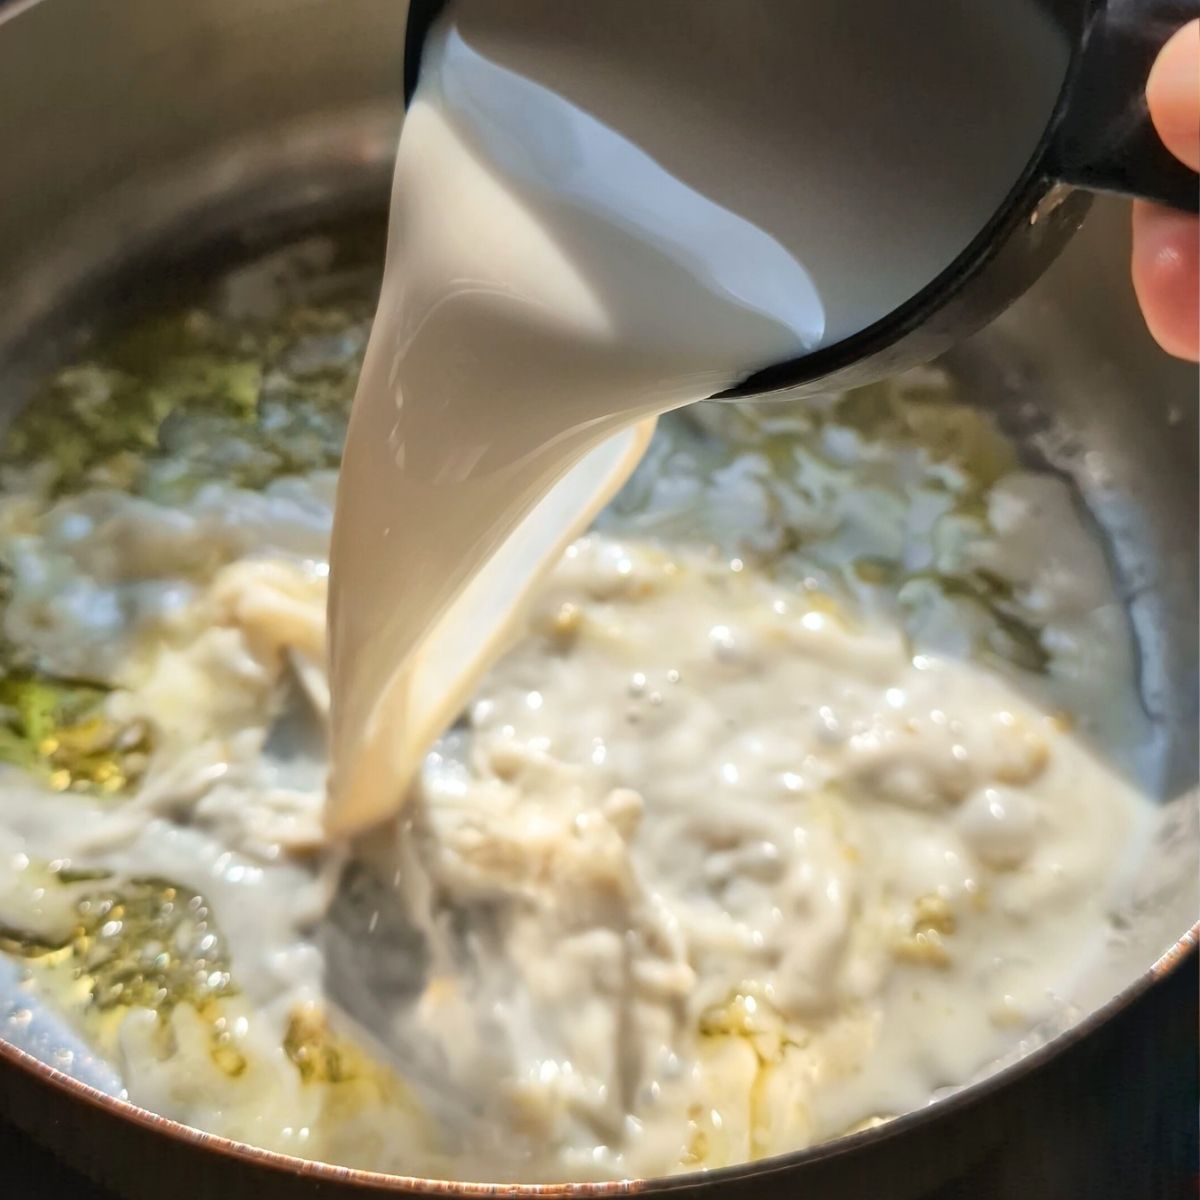 oat milk poured into a pan of garlic and olive oil to make a creamy vegan alfredo sauce.